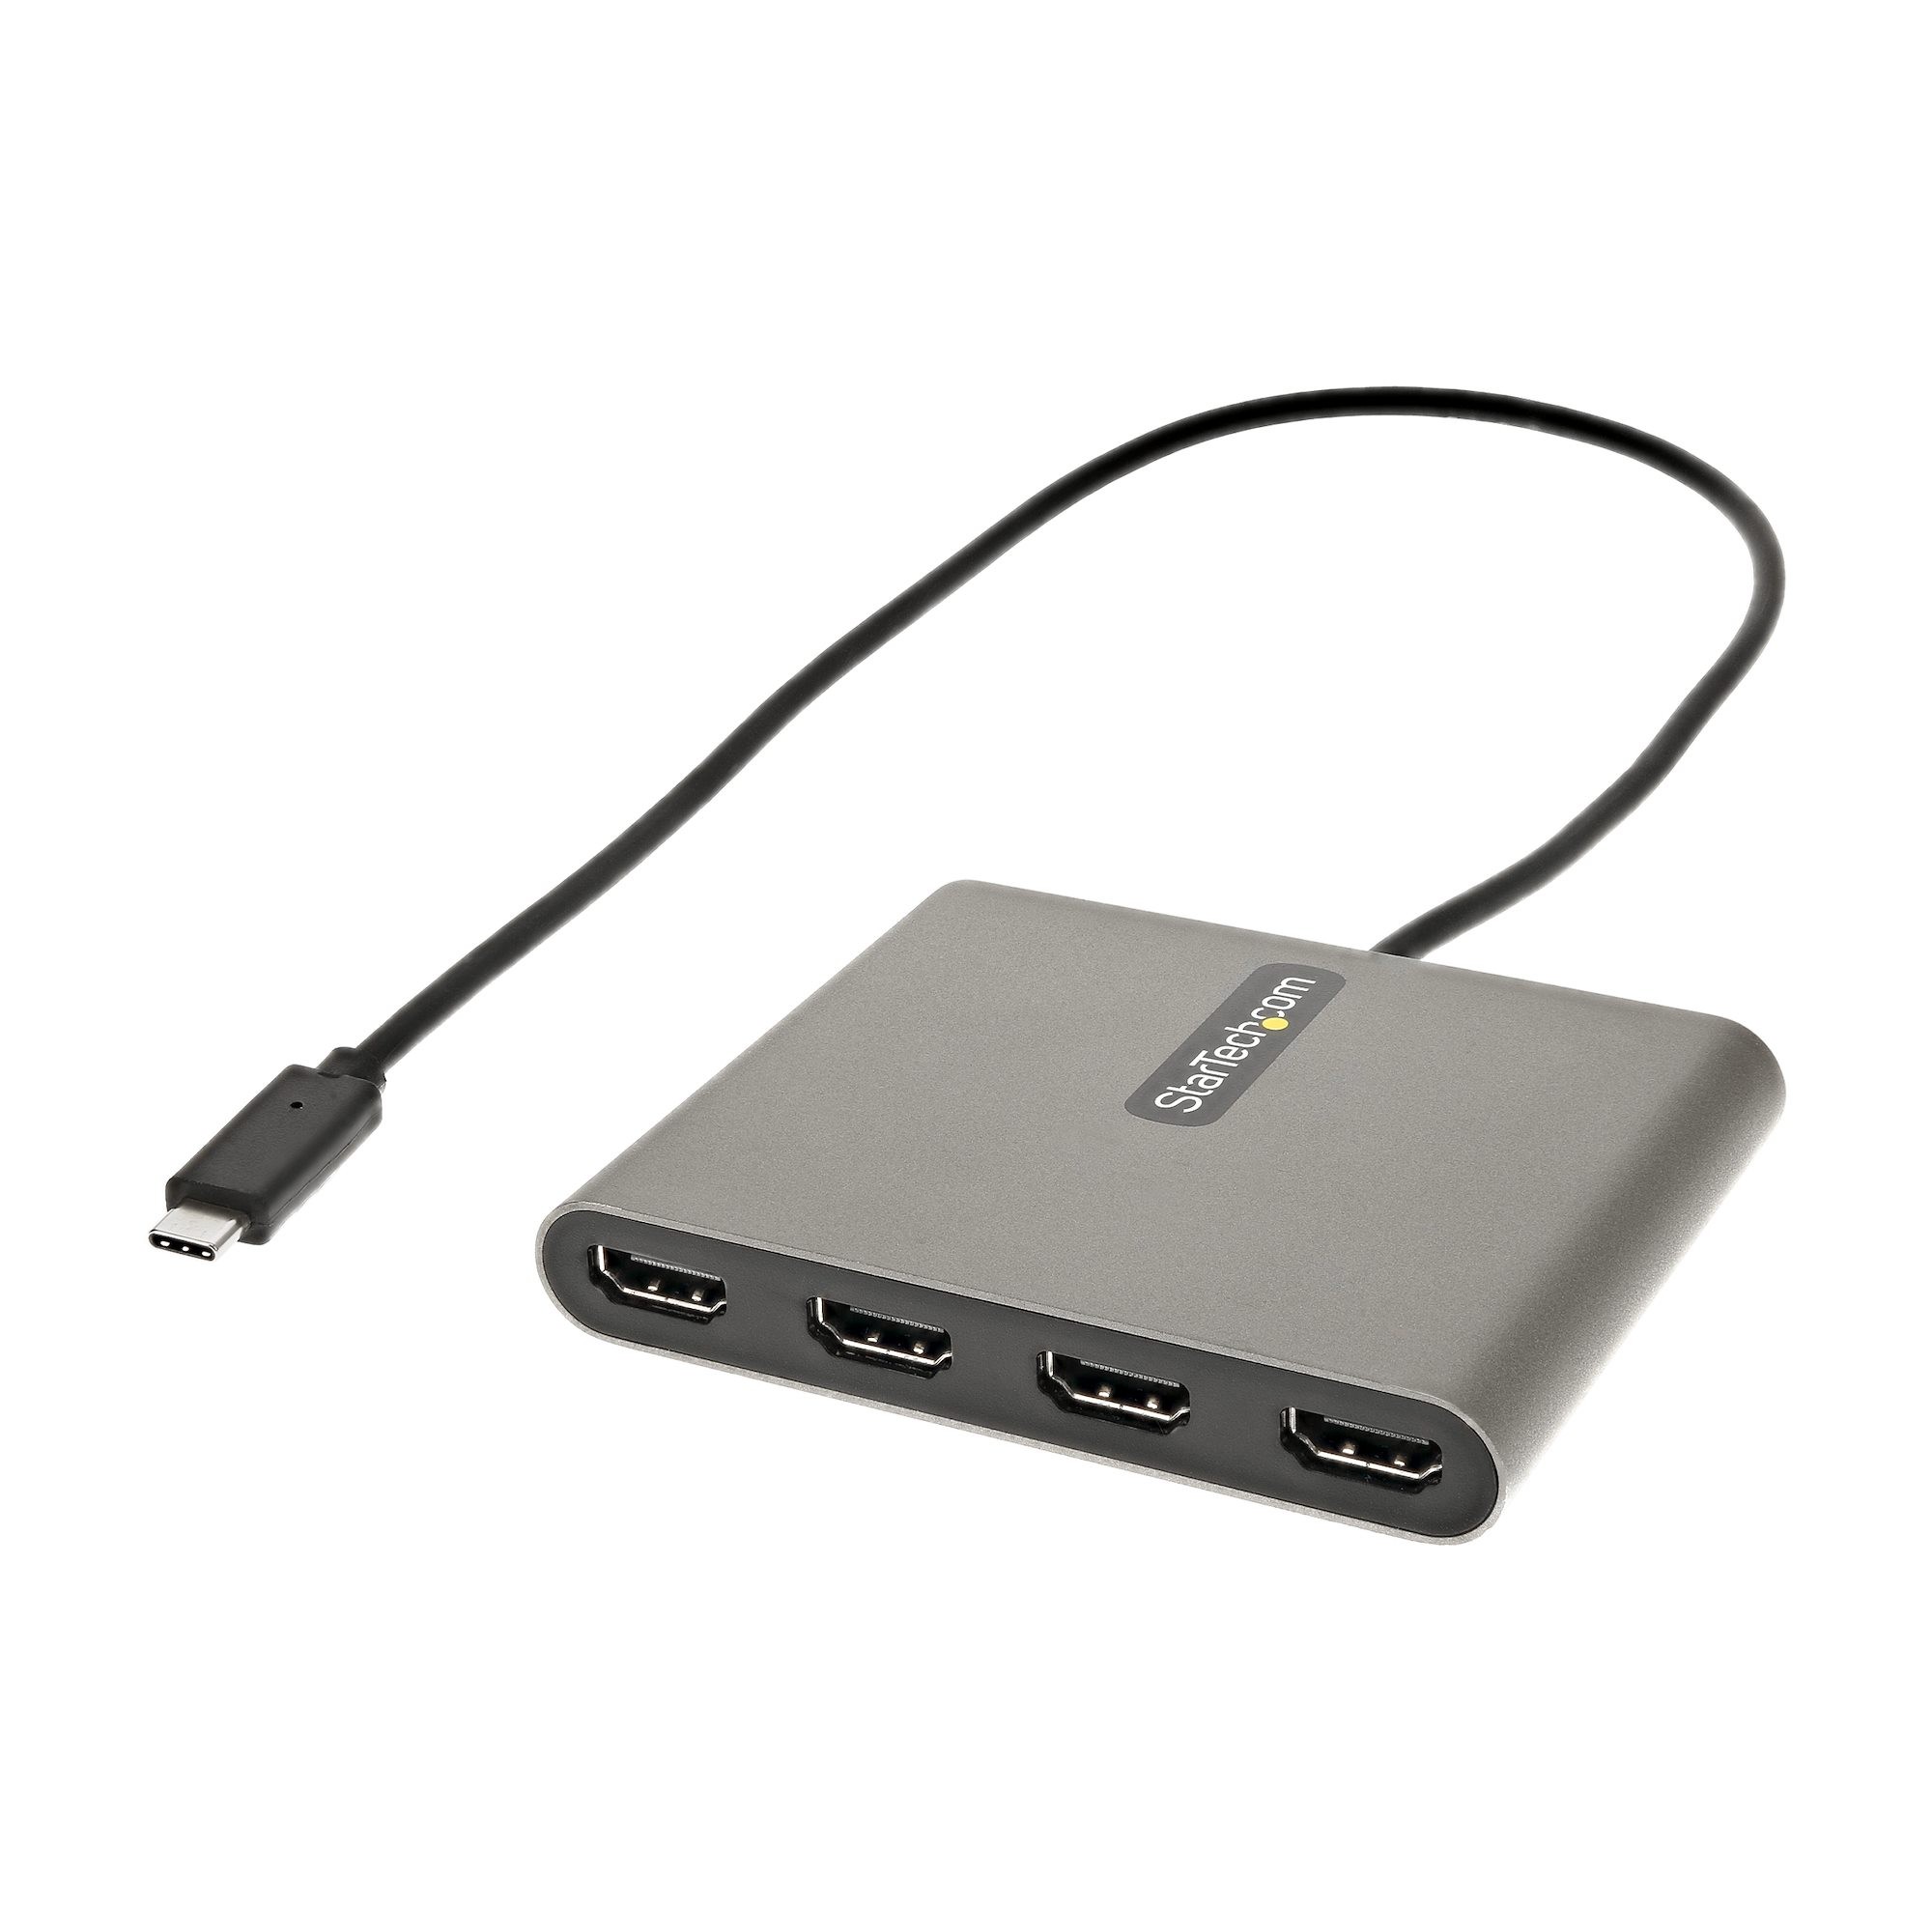 kapital klassisk Limited STCUSBC2HD4 - StarTech.com USB-C to HDMI Adapter - 1 Pack - 1 x 24-pin Type  C USB 3.0 USB Male - 4 x HDMI Digital Audio/Video Female - 1920 x 1080  Supported - Space Gray - Office Supply Hut